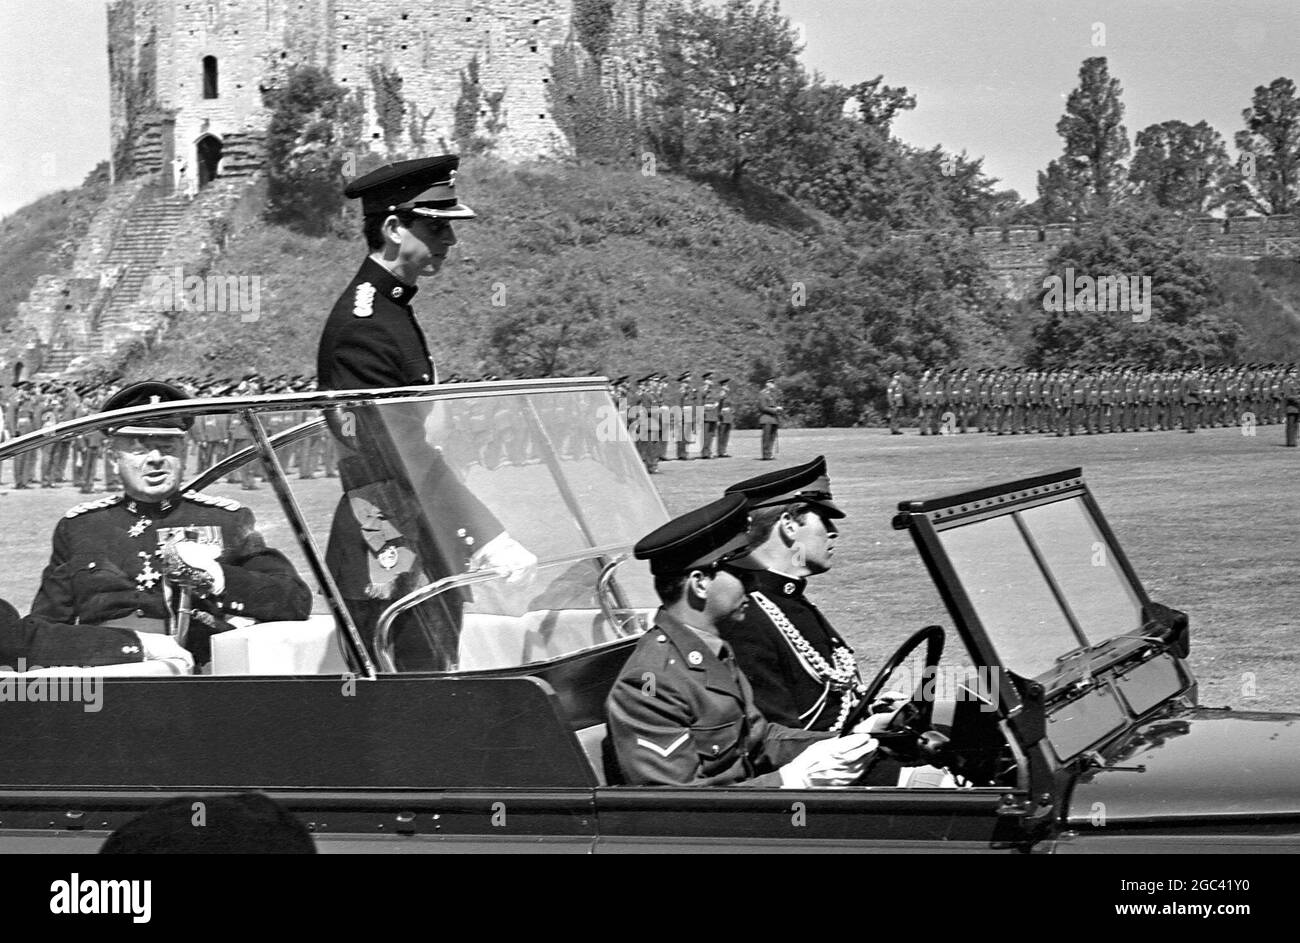 Prince Charles stand in an open car, wearing his investiture uniform for the first time here today, when he presented the colours at the Inauguration of the Royal Regiment of Wales, and accepted the Freedom of the City on behalf of the Regiment. The uniform, which is dark blue, is the one he wears as new Colonel in Chief of the Royal Regiment, and the one he will wear at his Investiture as the Prince of Wales at Caernavon Castle on 1 July 1969. At the Inauguration Ceremony, the South Wales Borderers and The Welsh Regiment were amalgumated into one regiment. Cardiff Castle Green , Cardiff, Wale Stock Photo